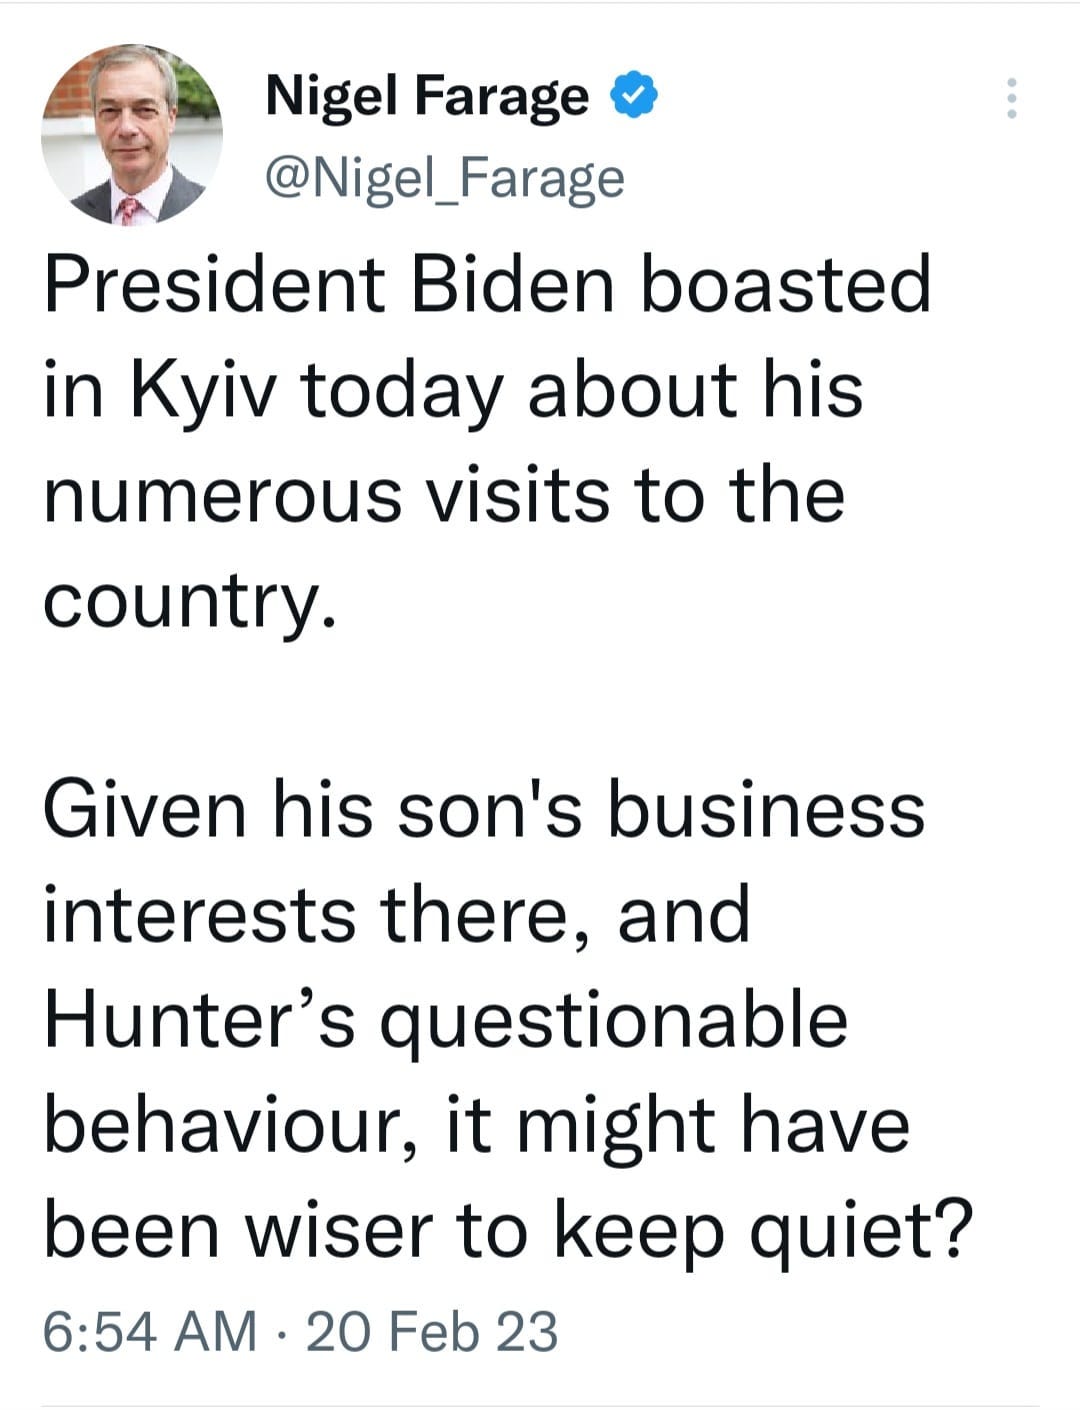 May be an image of 1 person and text that says 'Nigel Farage @Nigel_Farage President Biden boasted in Kyiv today about his numerous visits to the country. Given his son's business interests there, and Hunter's questionable behaviour it might have been wiser to keep quiet? 6:54 AM 20 Feb 23'